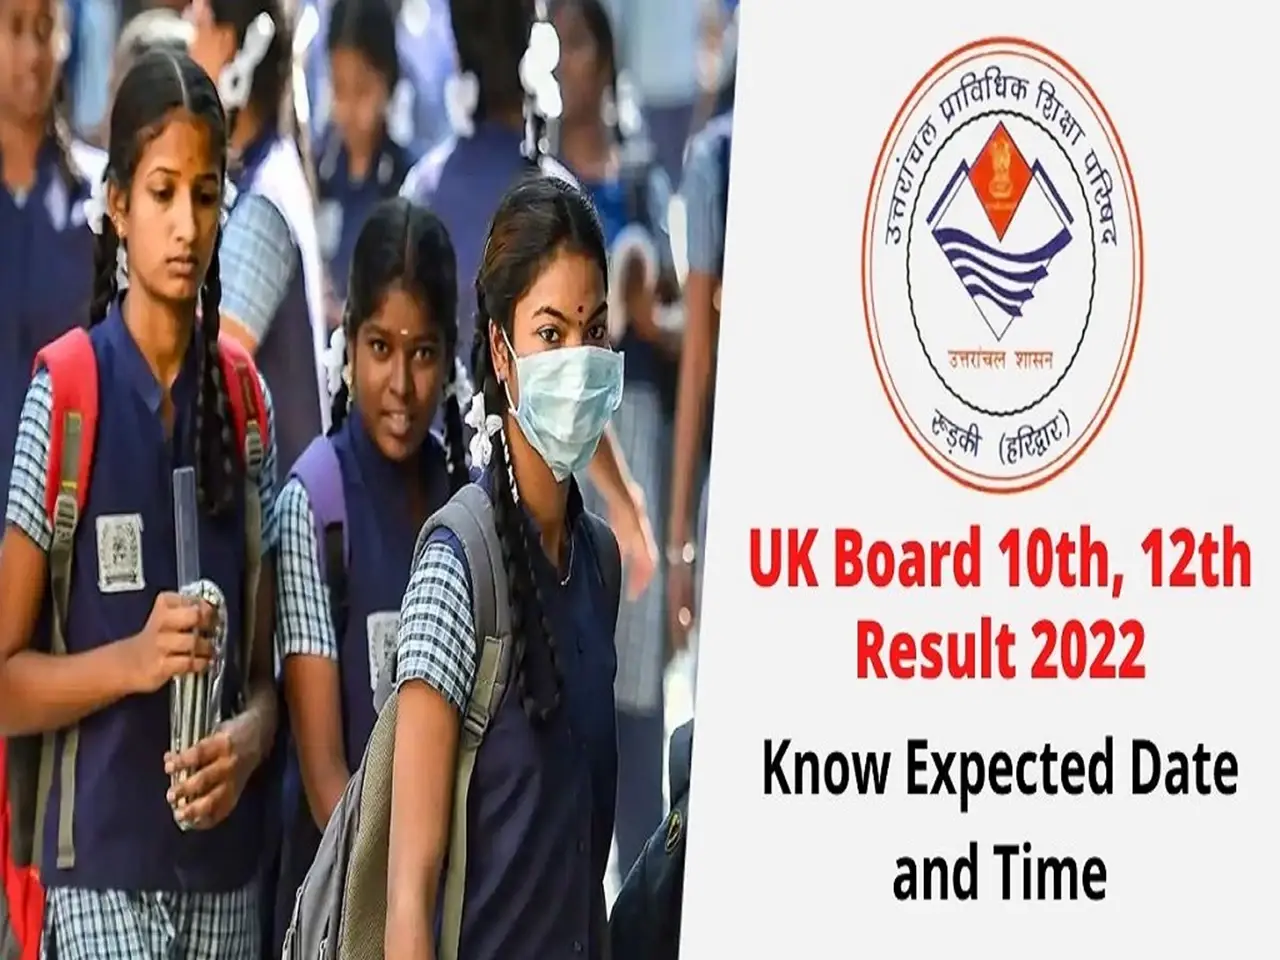 Uttarakhand Board Result 2022: UK Board UBSE Class 10th, 12th Result To be Announced Today